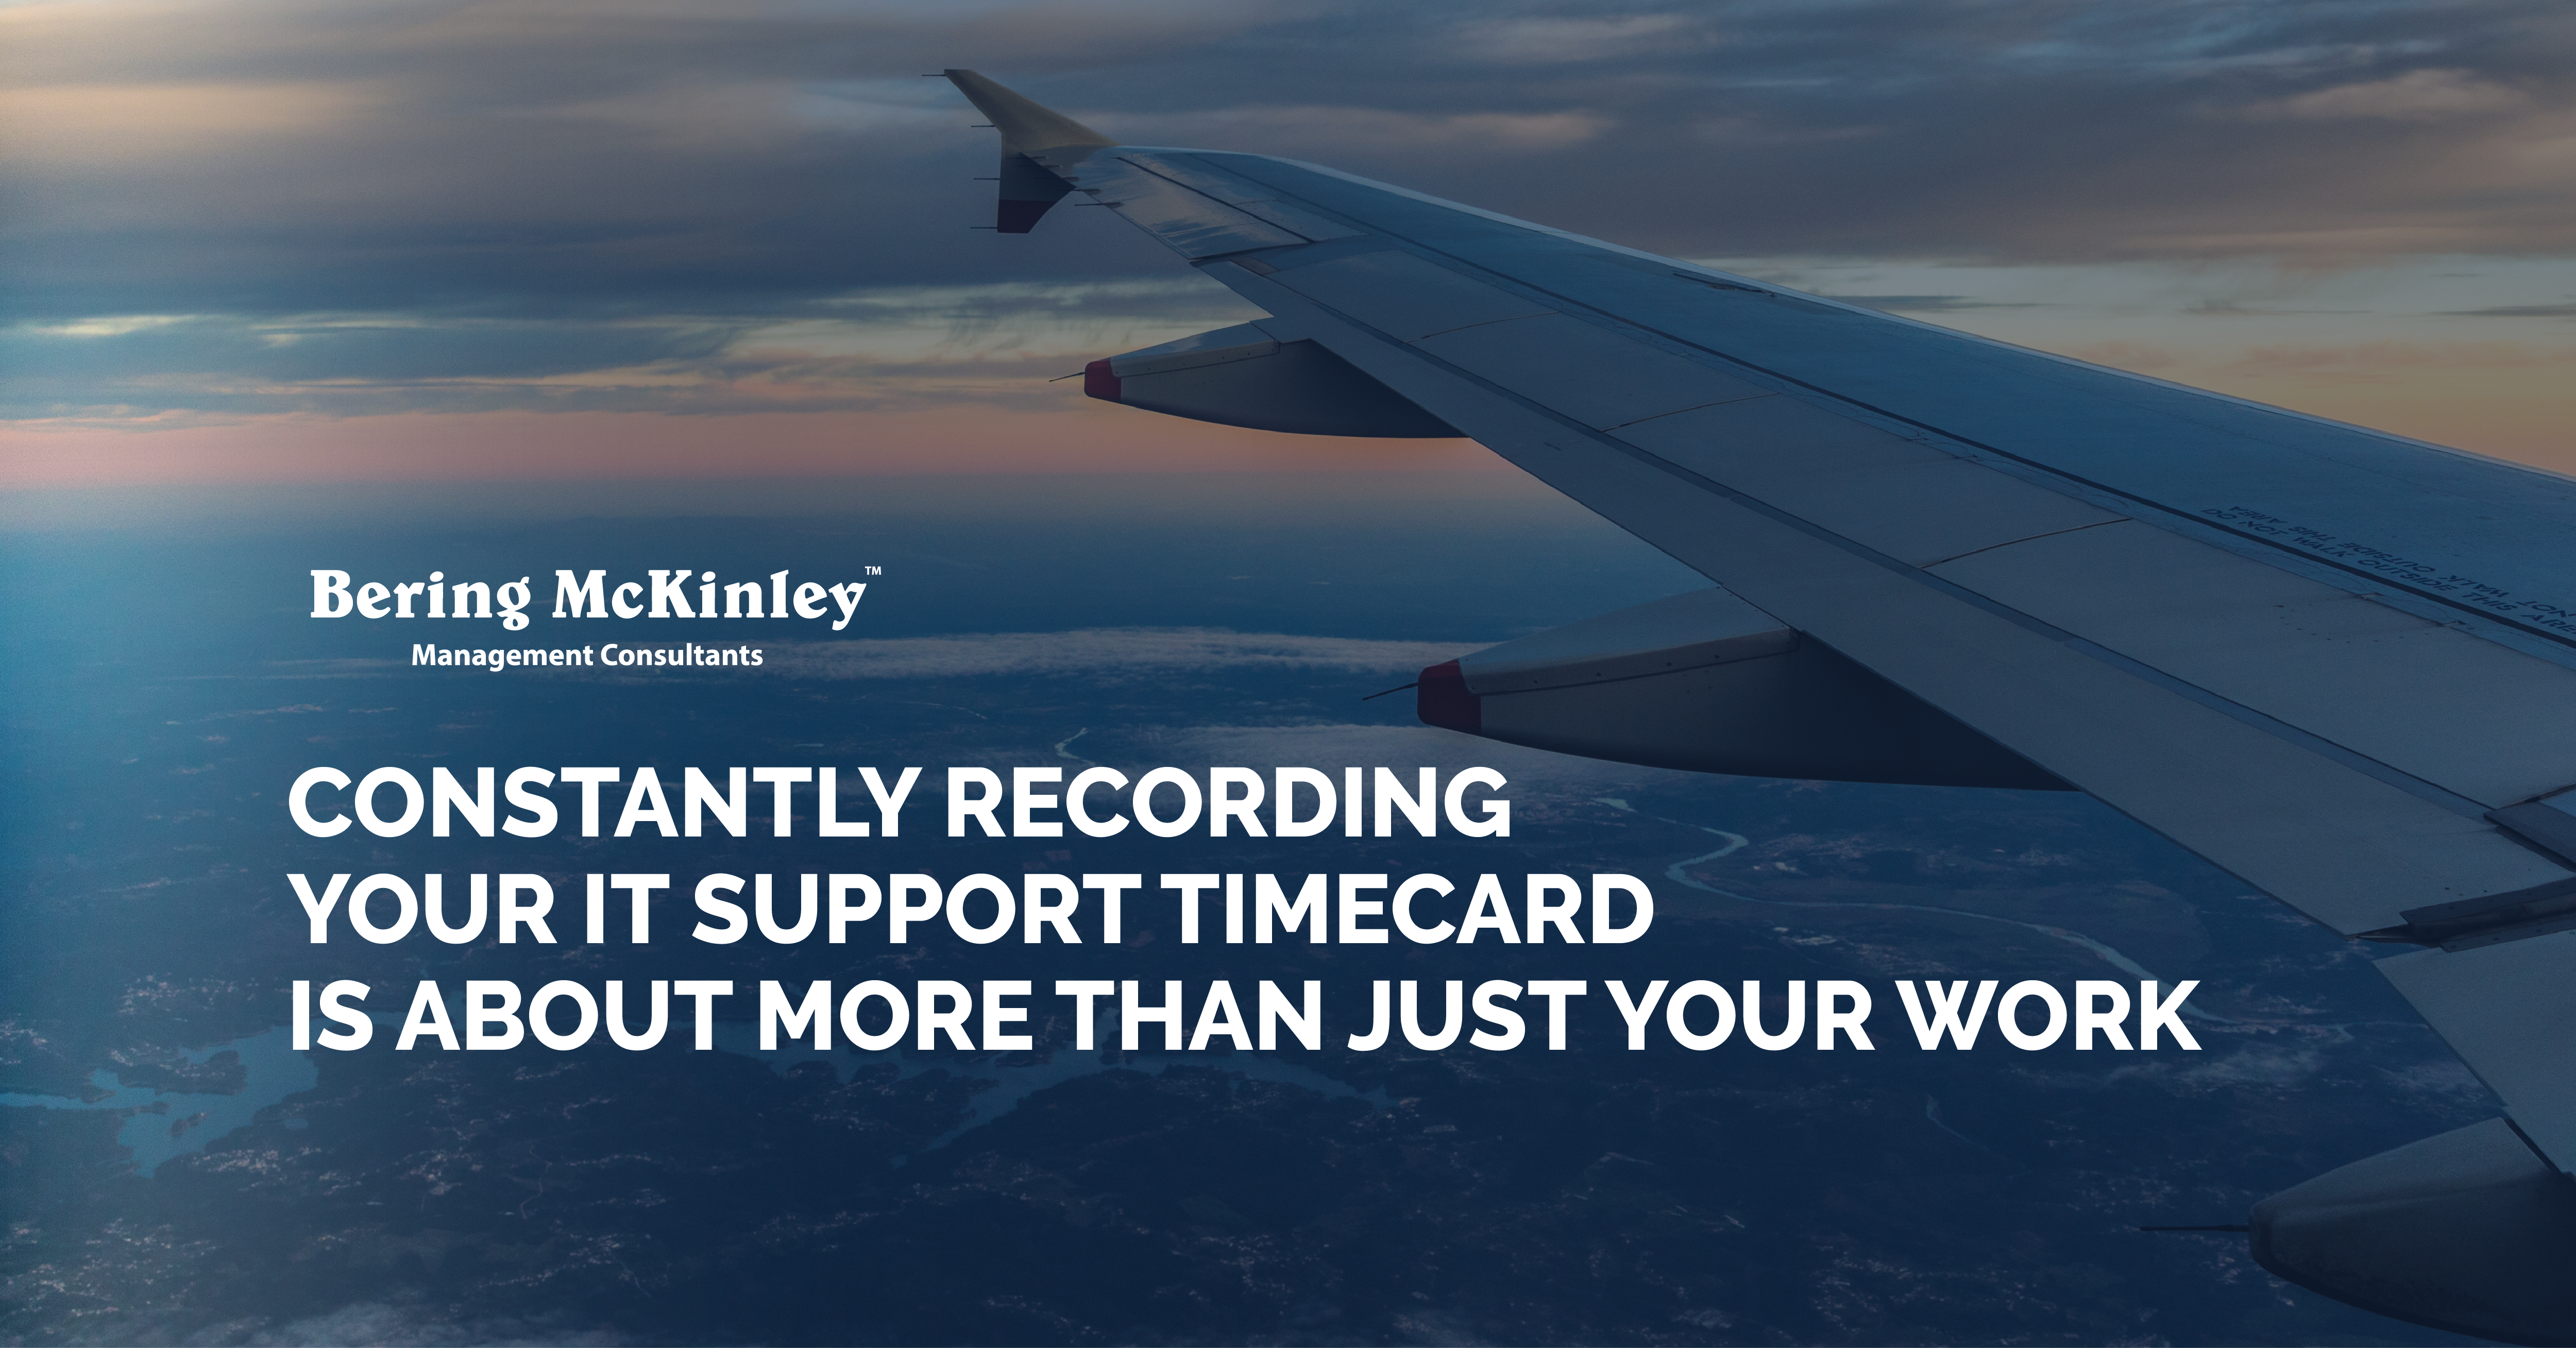 Constantly Recording Your IT Support Timecard Is About More Than Just Your Work